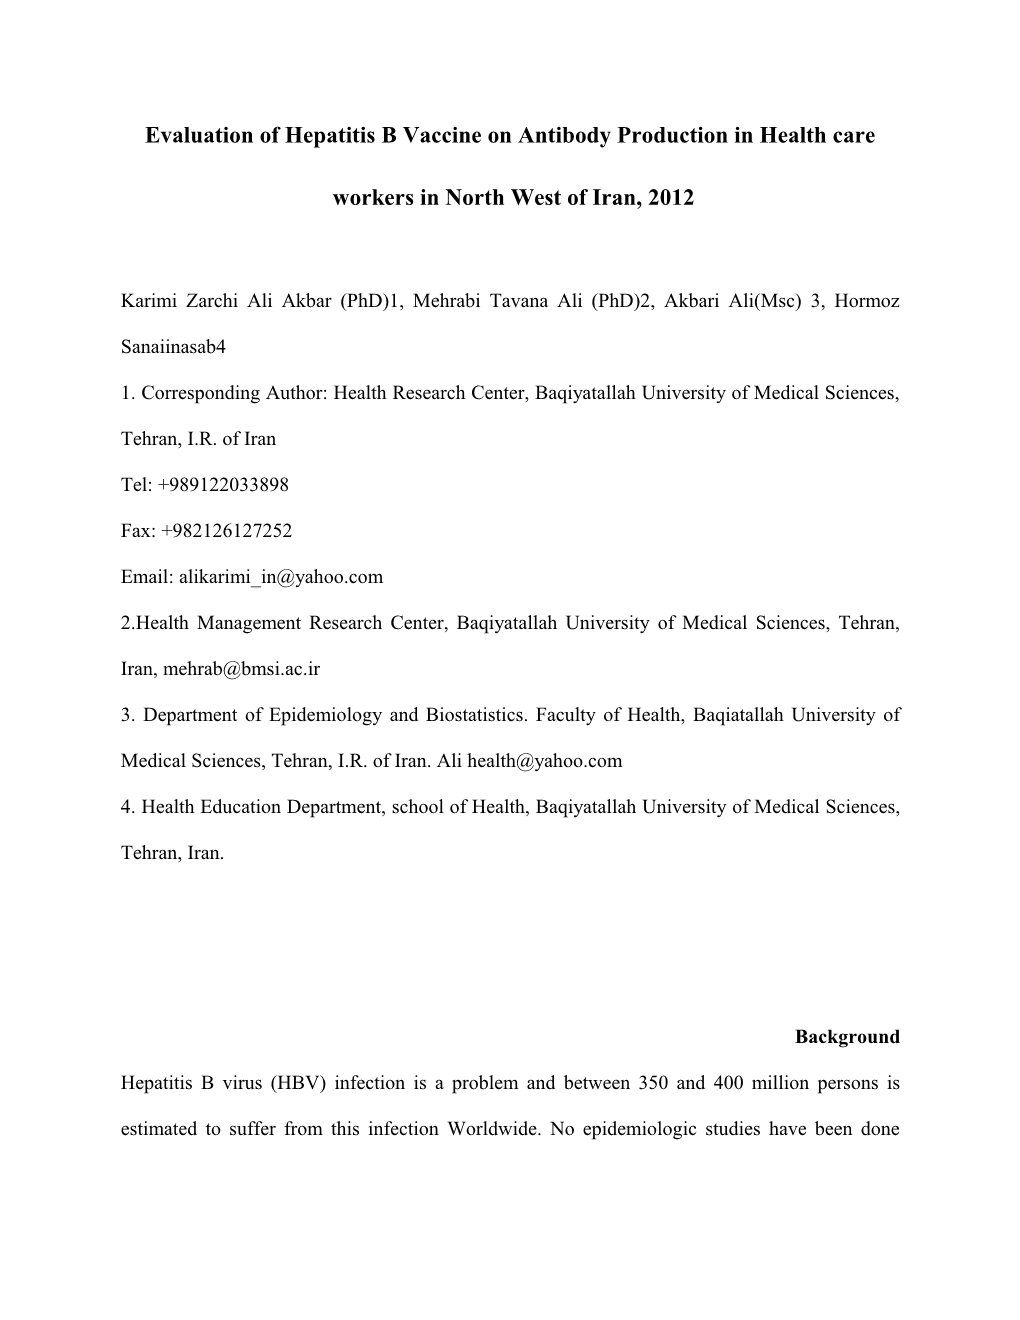 Evaluation of Hepatitis B Vaccine on Antibody Production in Health Care Workers in North